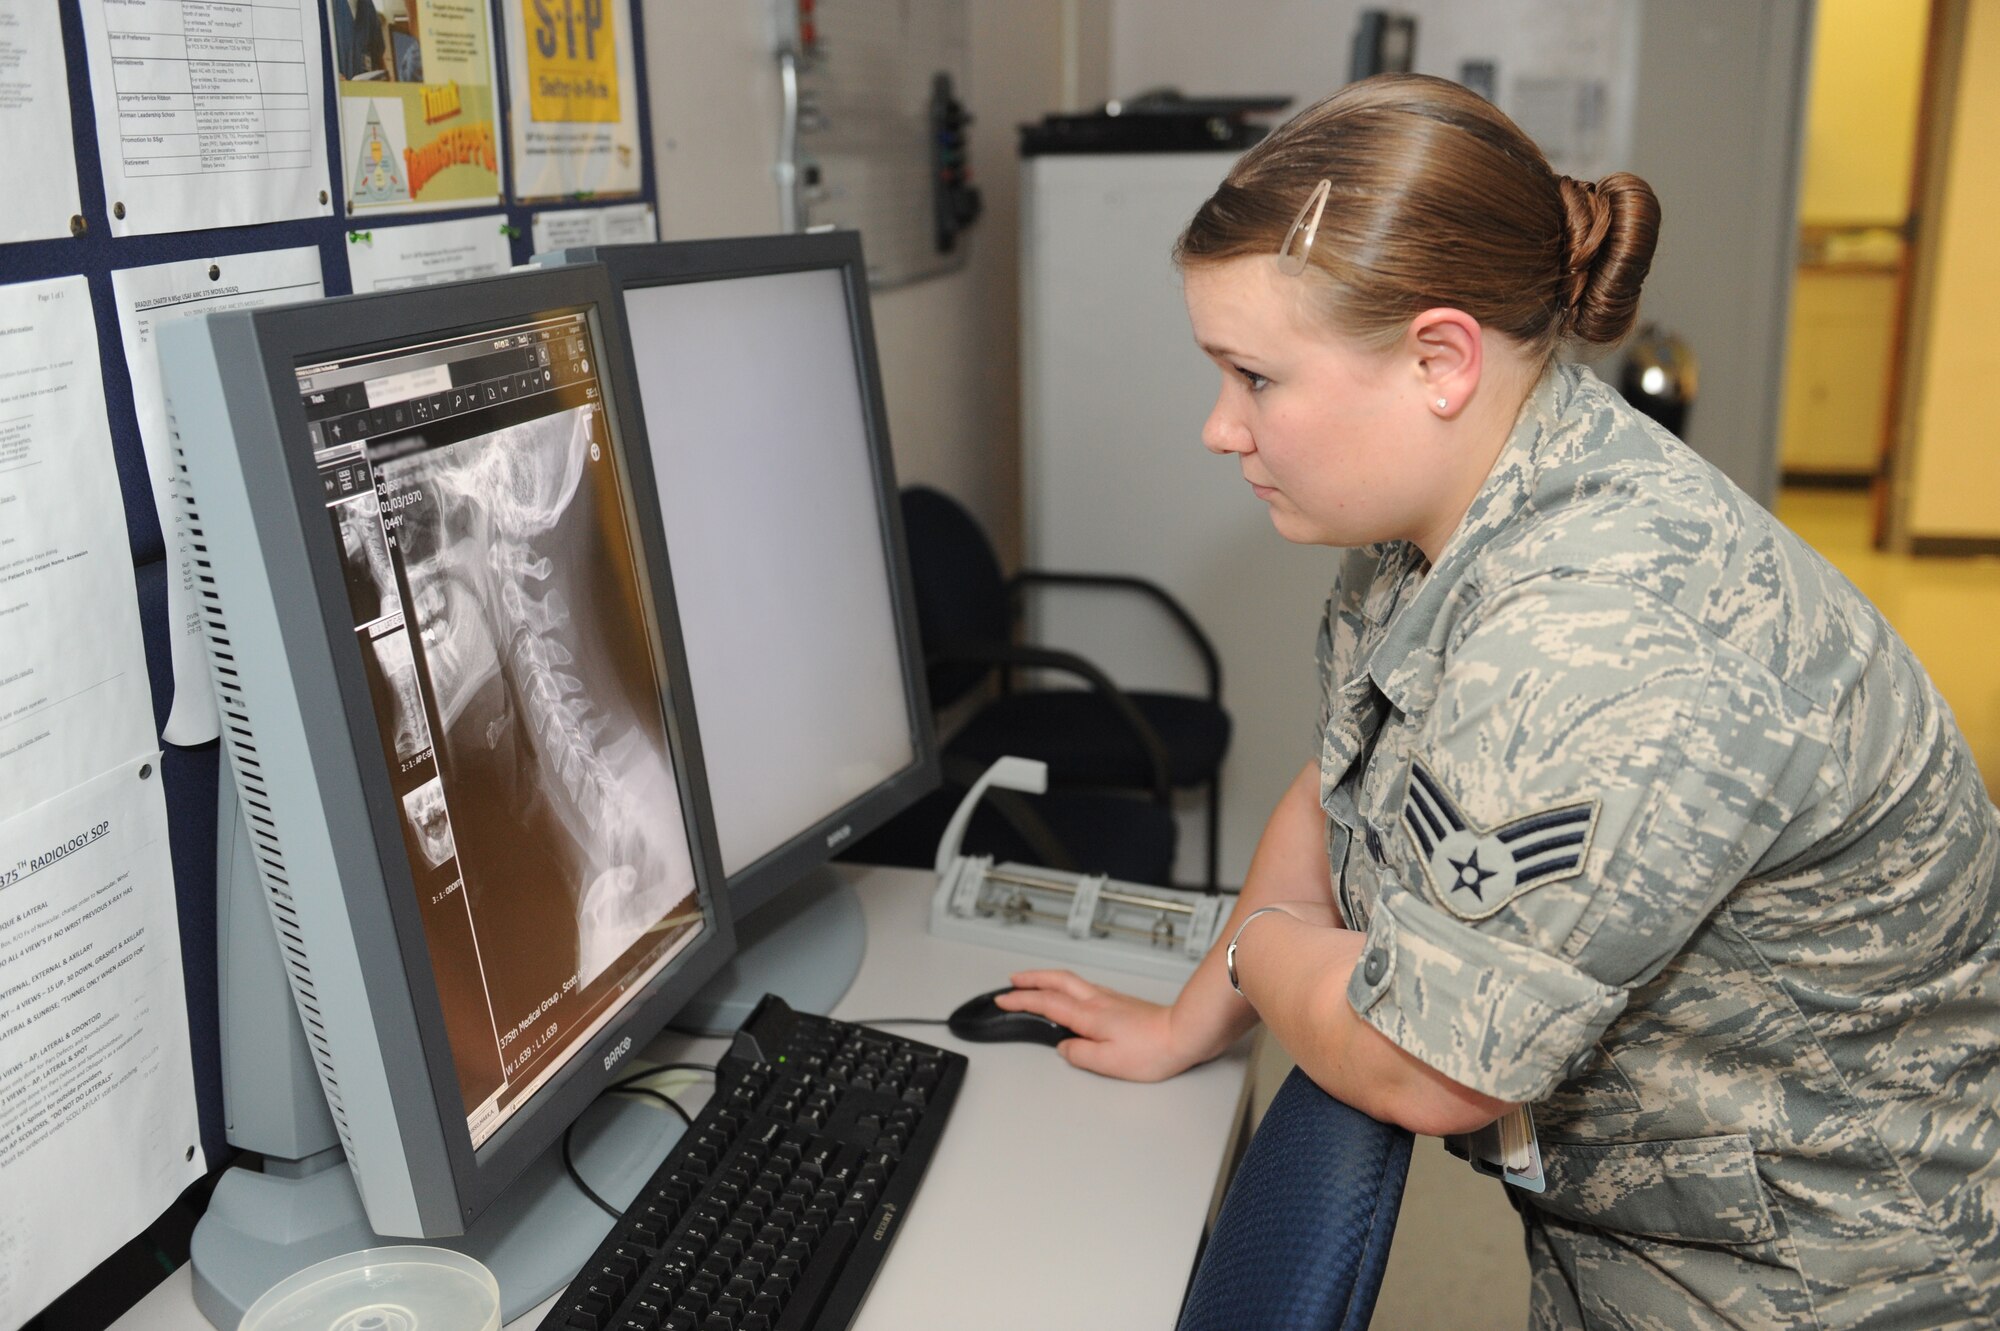 Senior Airman Casey Burch looks at a patient’s X-ray at Scott Air Force Base, Ill., June 3, 2014.  This process is called Quality Control, where X-ray images are double checked in order to make sure radiographs are correct and of a diagnostic quality.  Burch is a 375th Medical Support Squadron radiology technologist.  (U.S. Air Force photo by Staff Sgt. Maria Bowman)